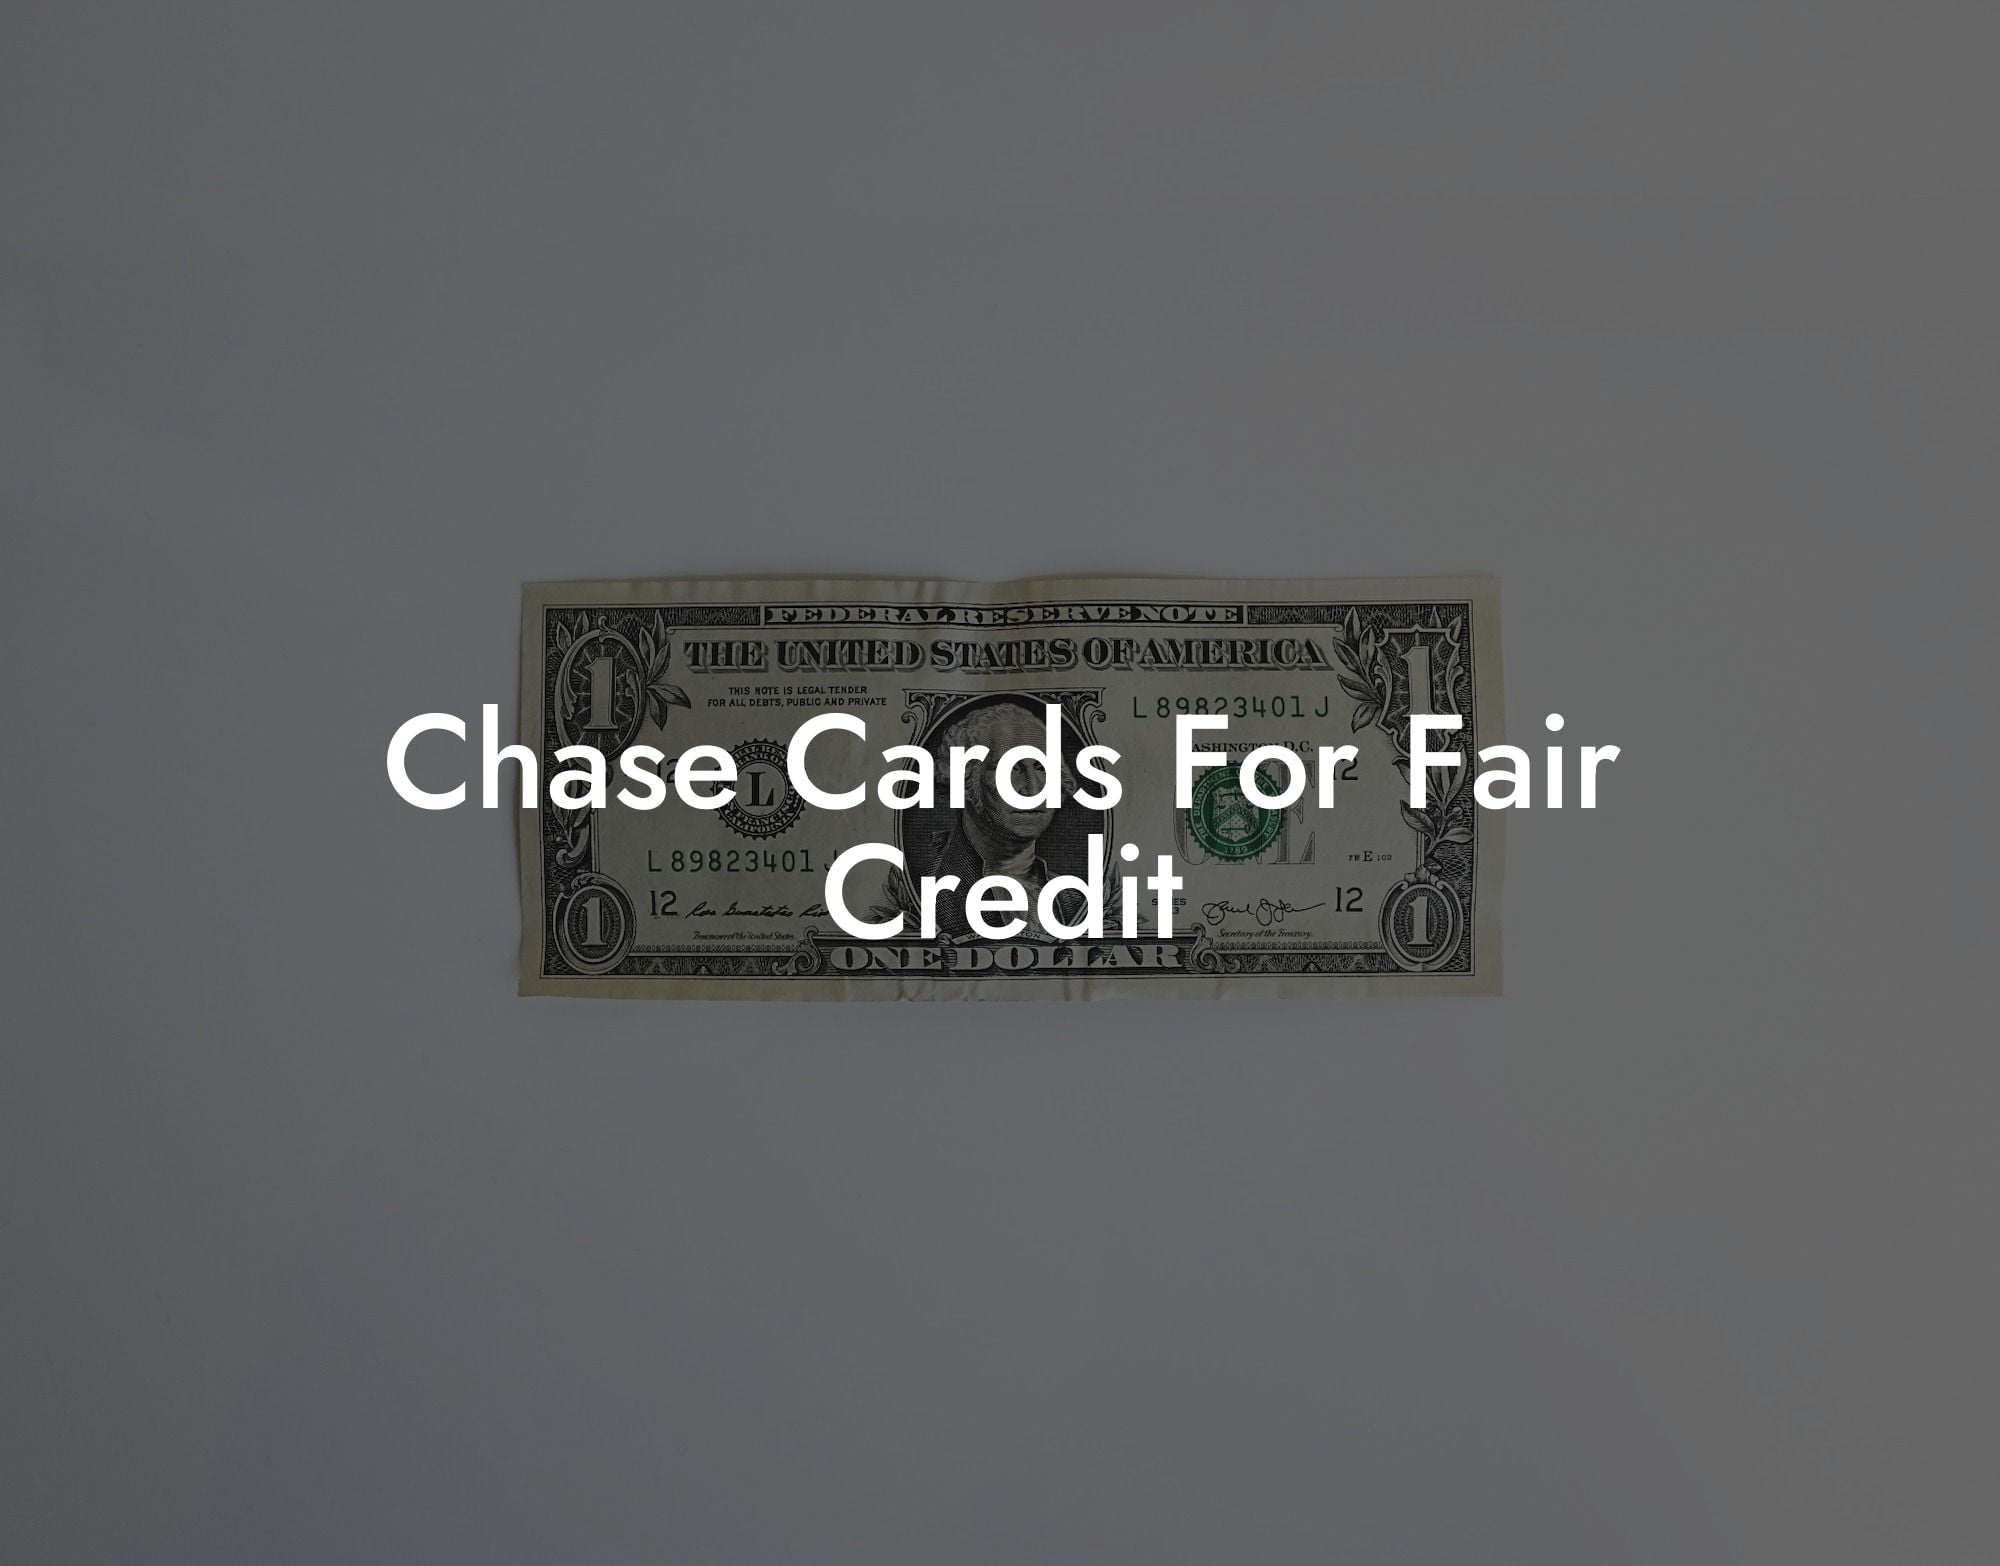 Chase Cards For Fair Credit